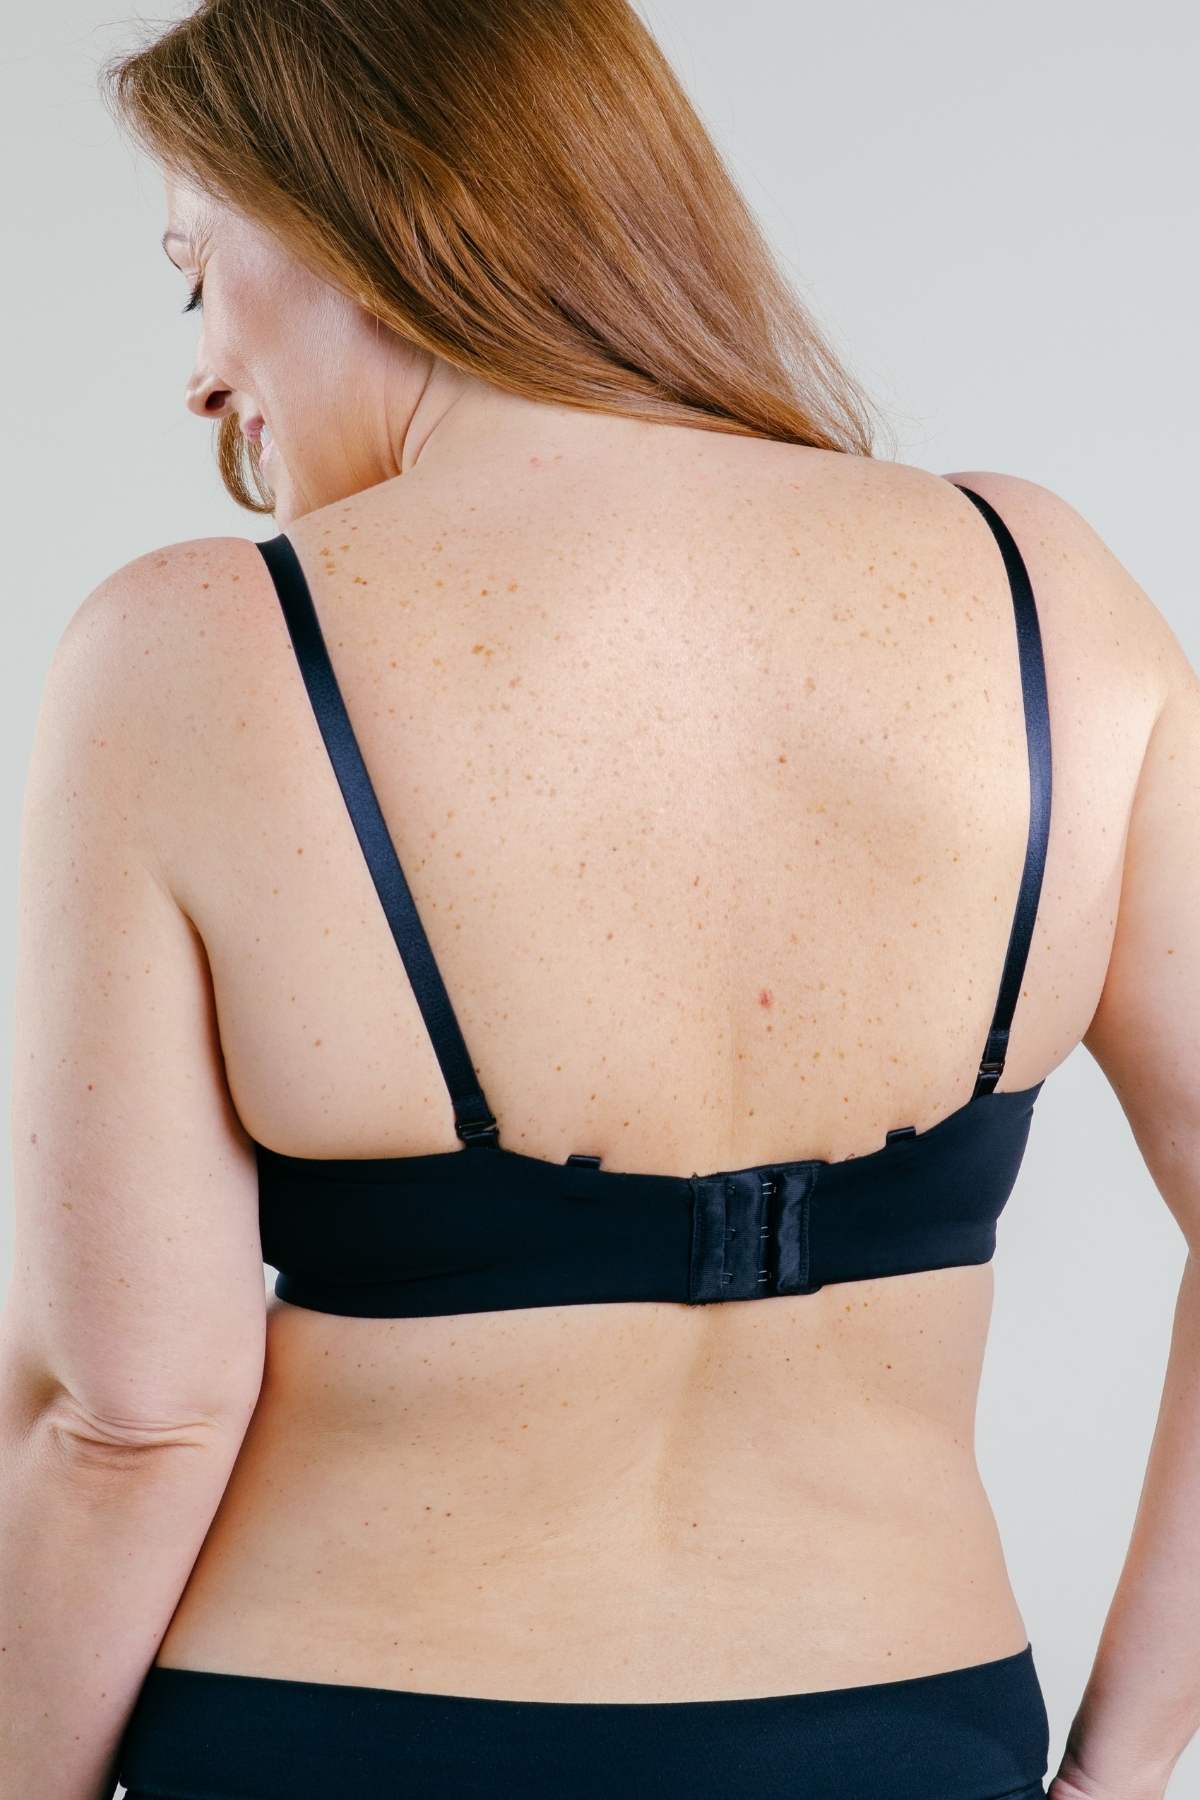 Go go go - best bra from @Snag Tights ever you won't regret it! #pluss